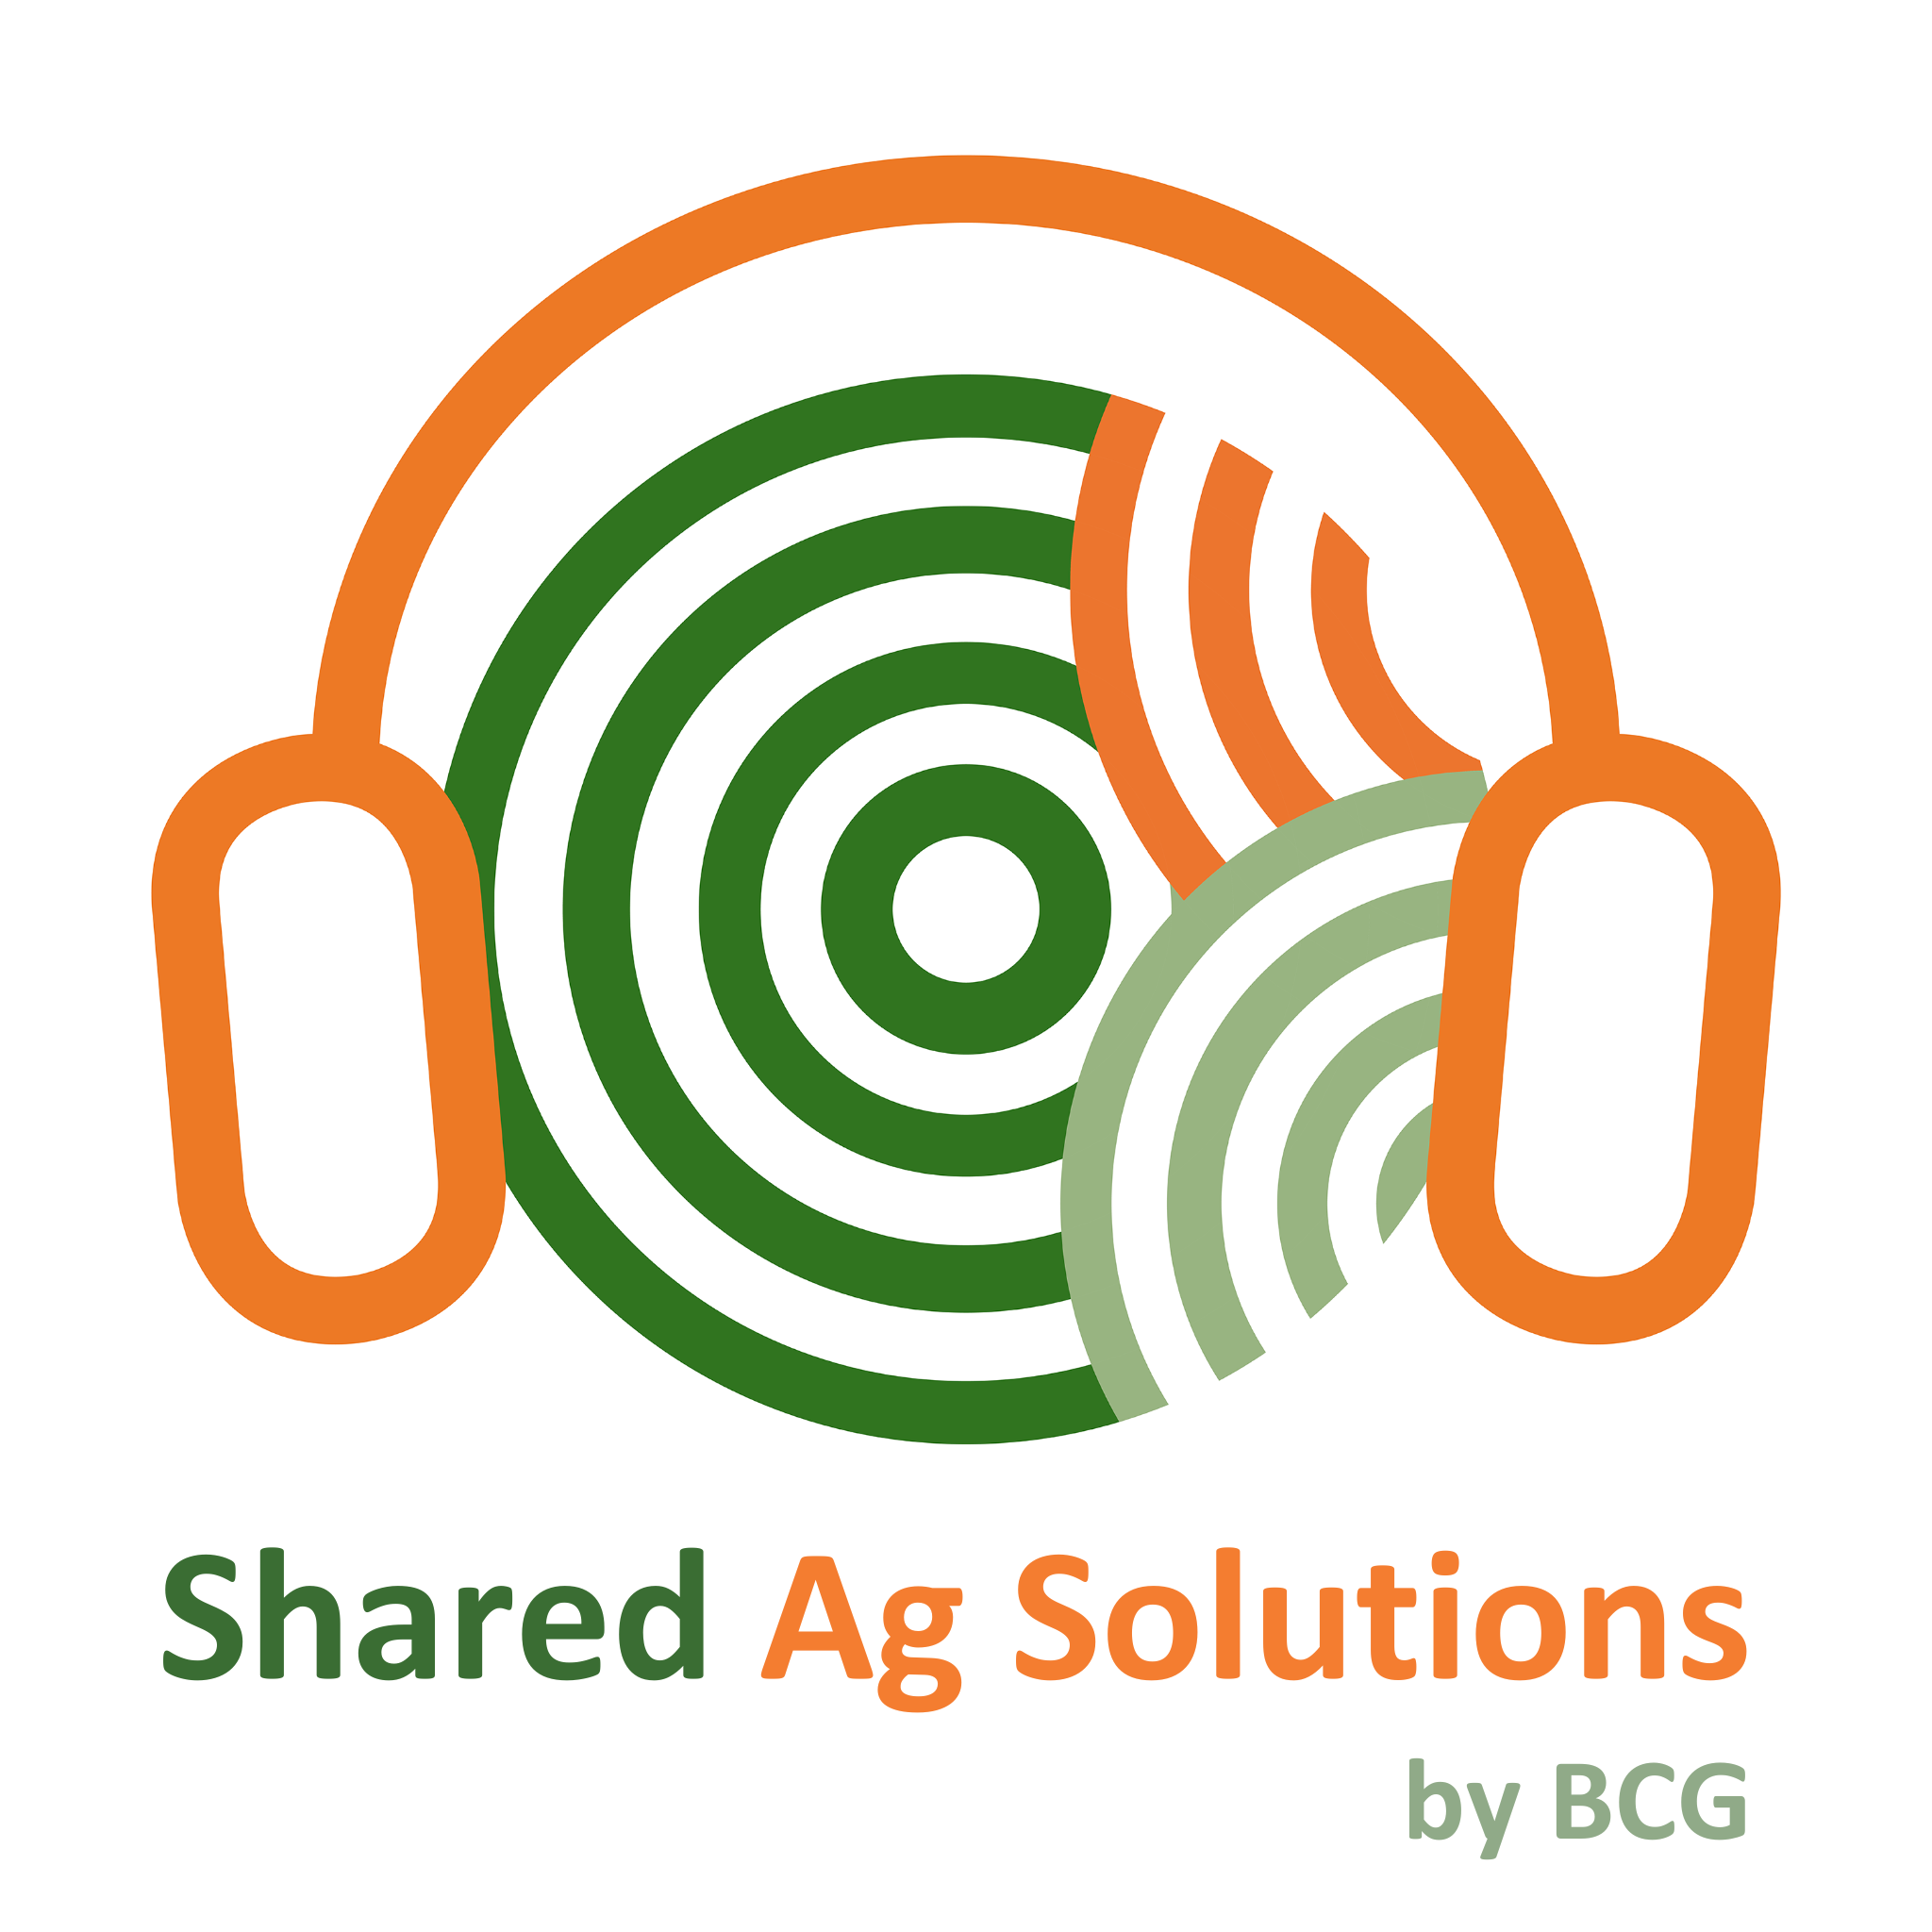 Shared Ag Solutions by BCG